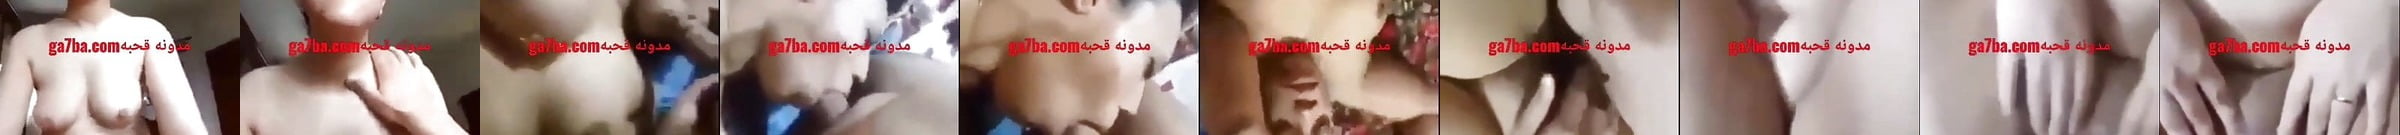 Featured Egyptian Big Boobs Porn Videos Xhamster